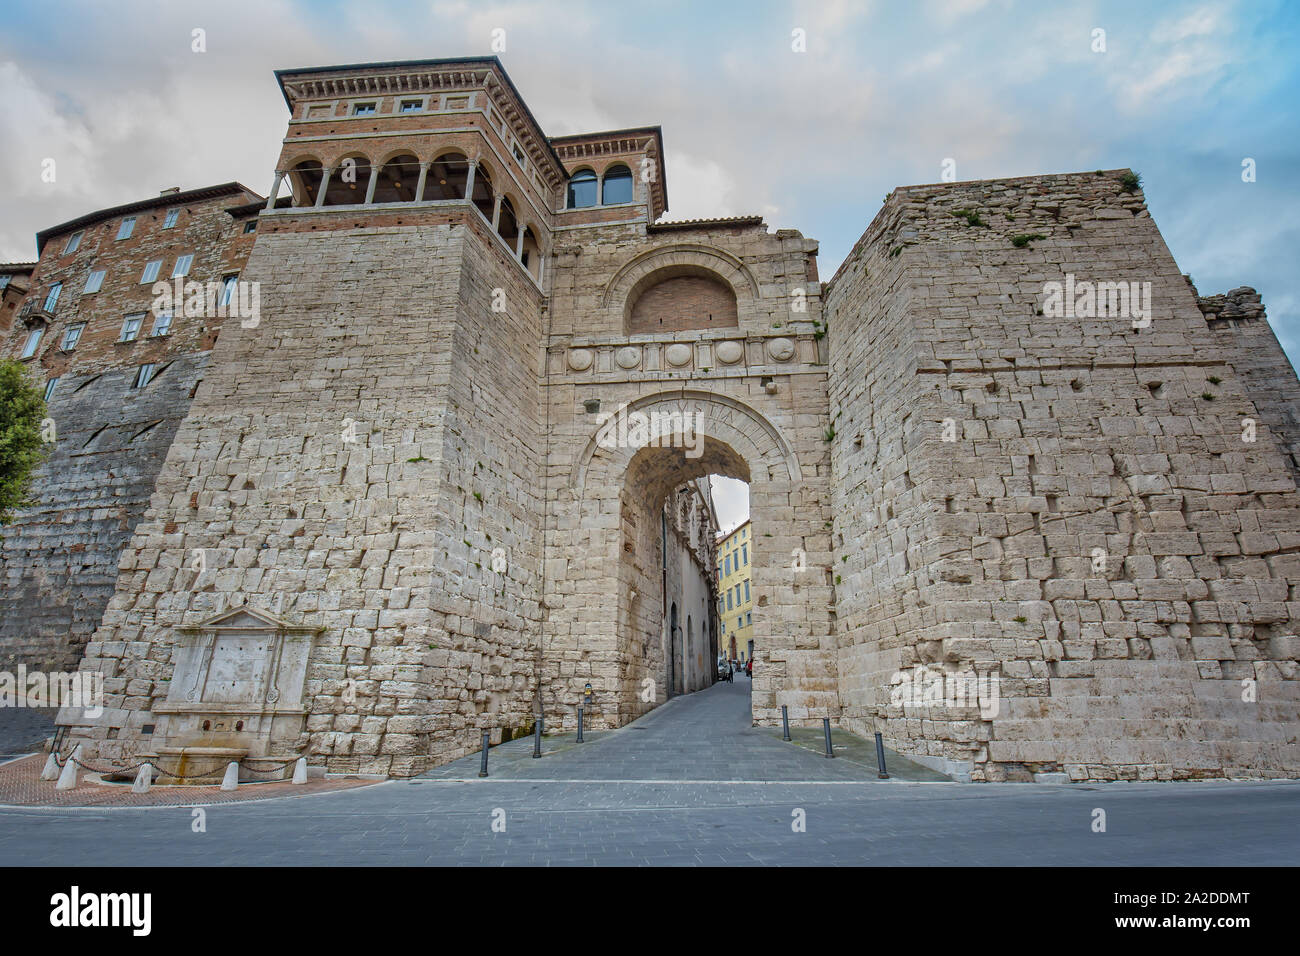 View of the  Etruscan Arch or Augustus Gate in Perugia, it was one of the seven entrance gates to Perugia in the Etruscan period, Umbria, Italy Stock Photo